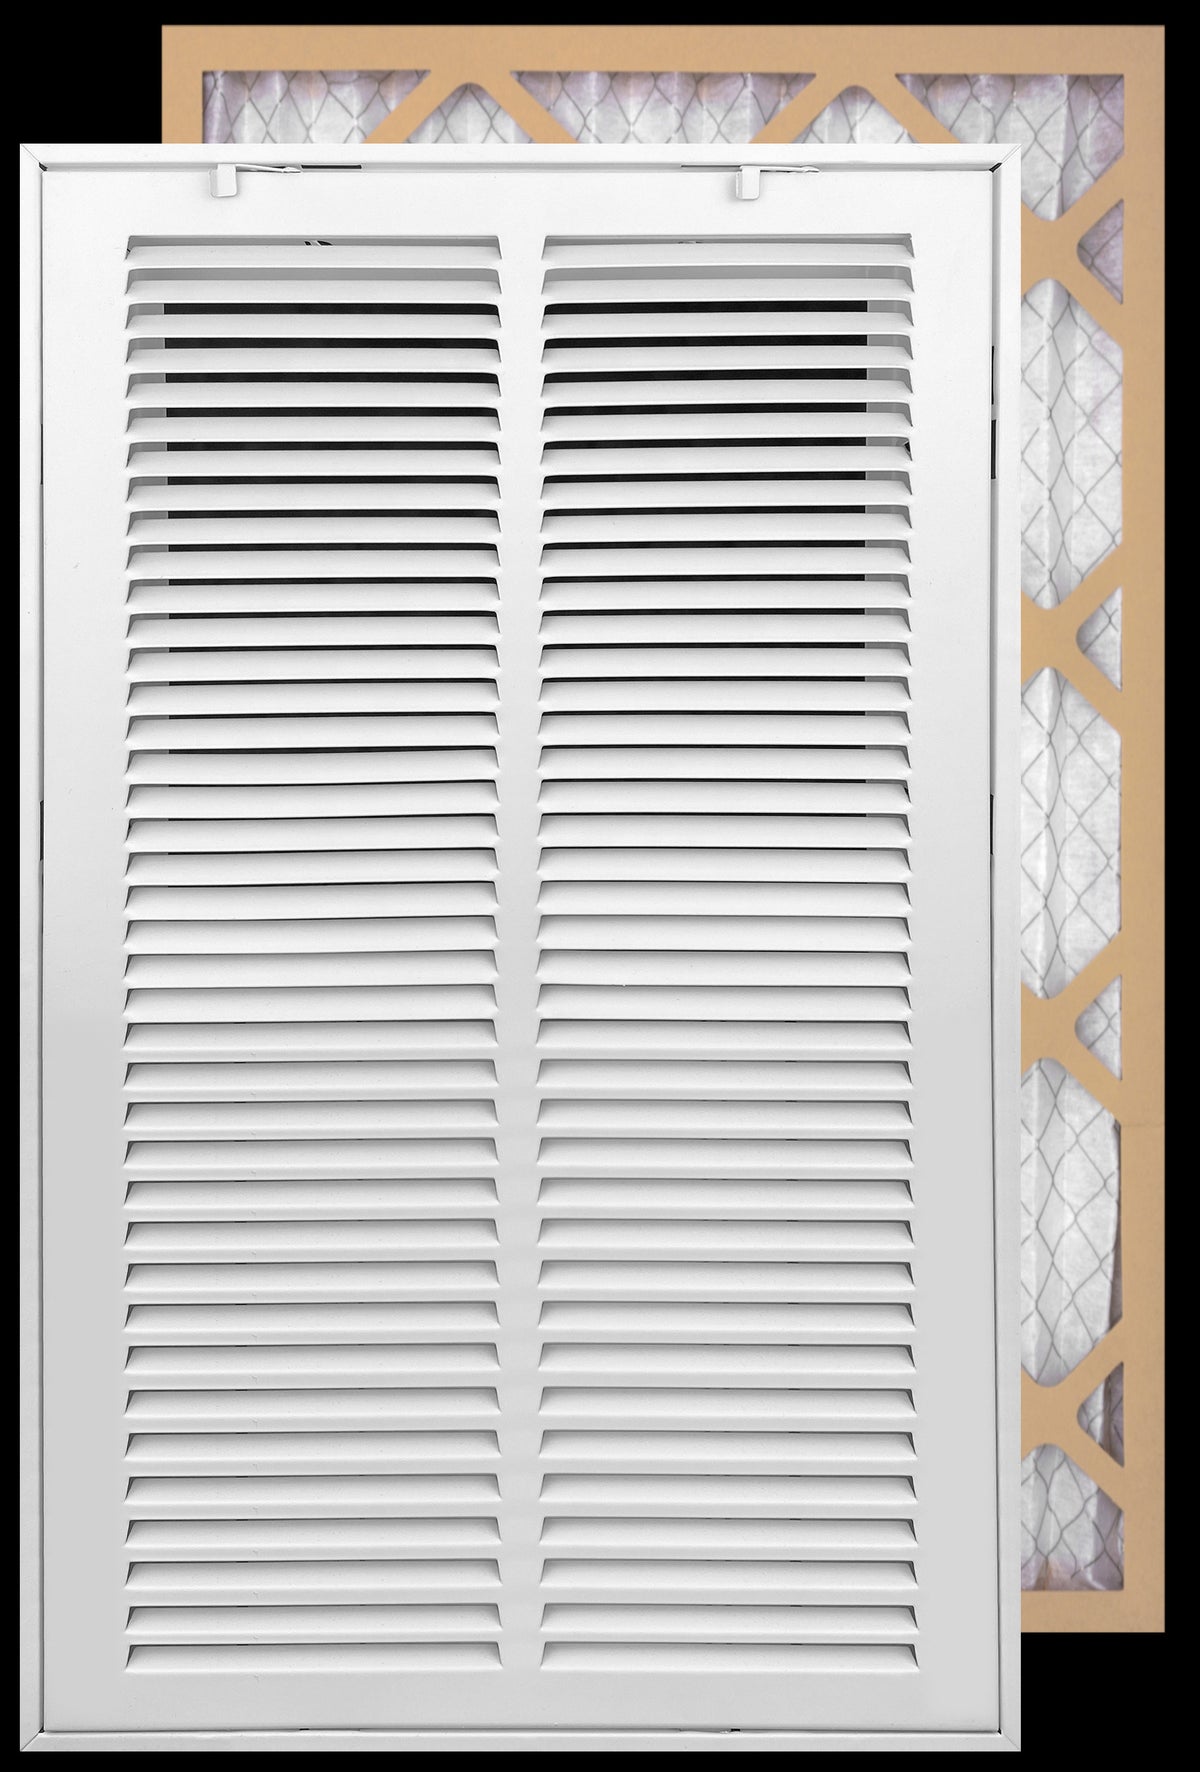 airgrilles 14" x 20" duct opening  -  filter included hd steel return air filter grille for sidewall and ceiling fil-7rafg1-wh-14x20 038775643863 - 1